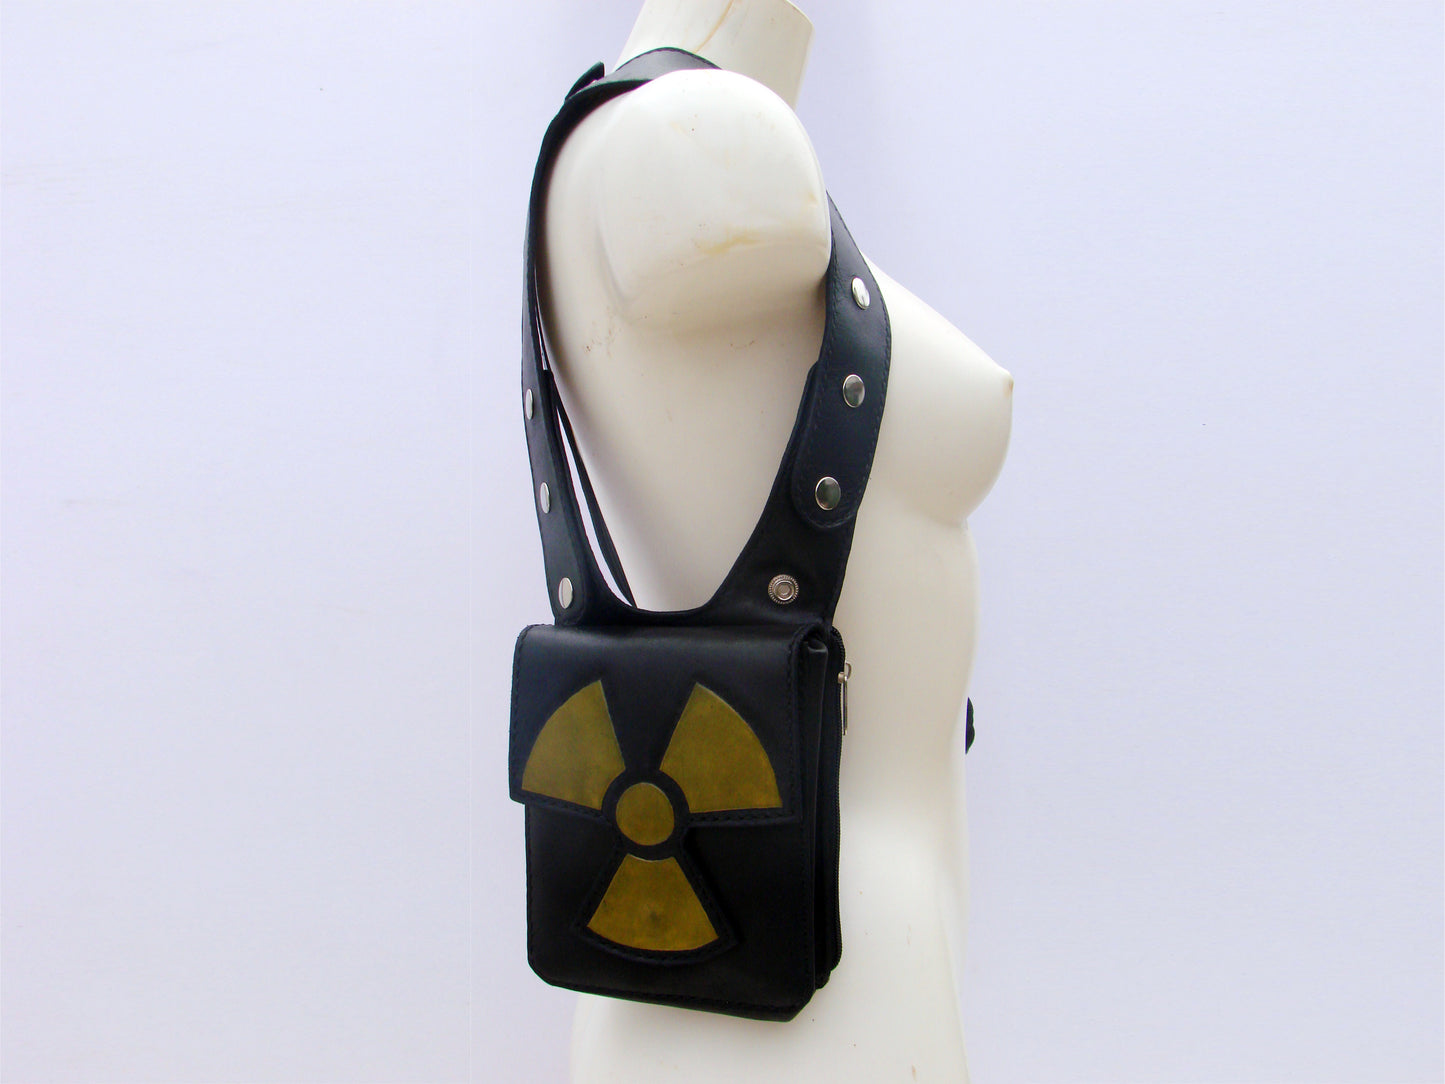 Rock & Rave in style with our leather double shoulder holster bag hand tooled radioactive symbol